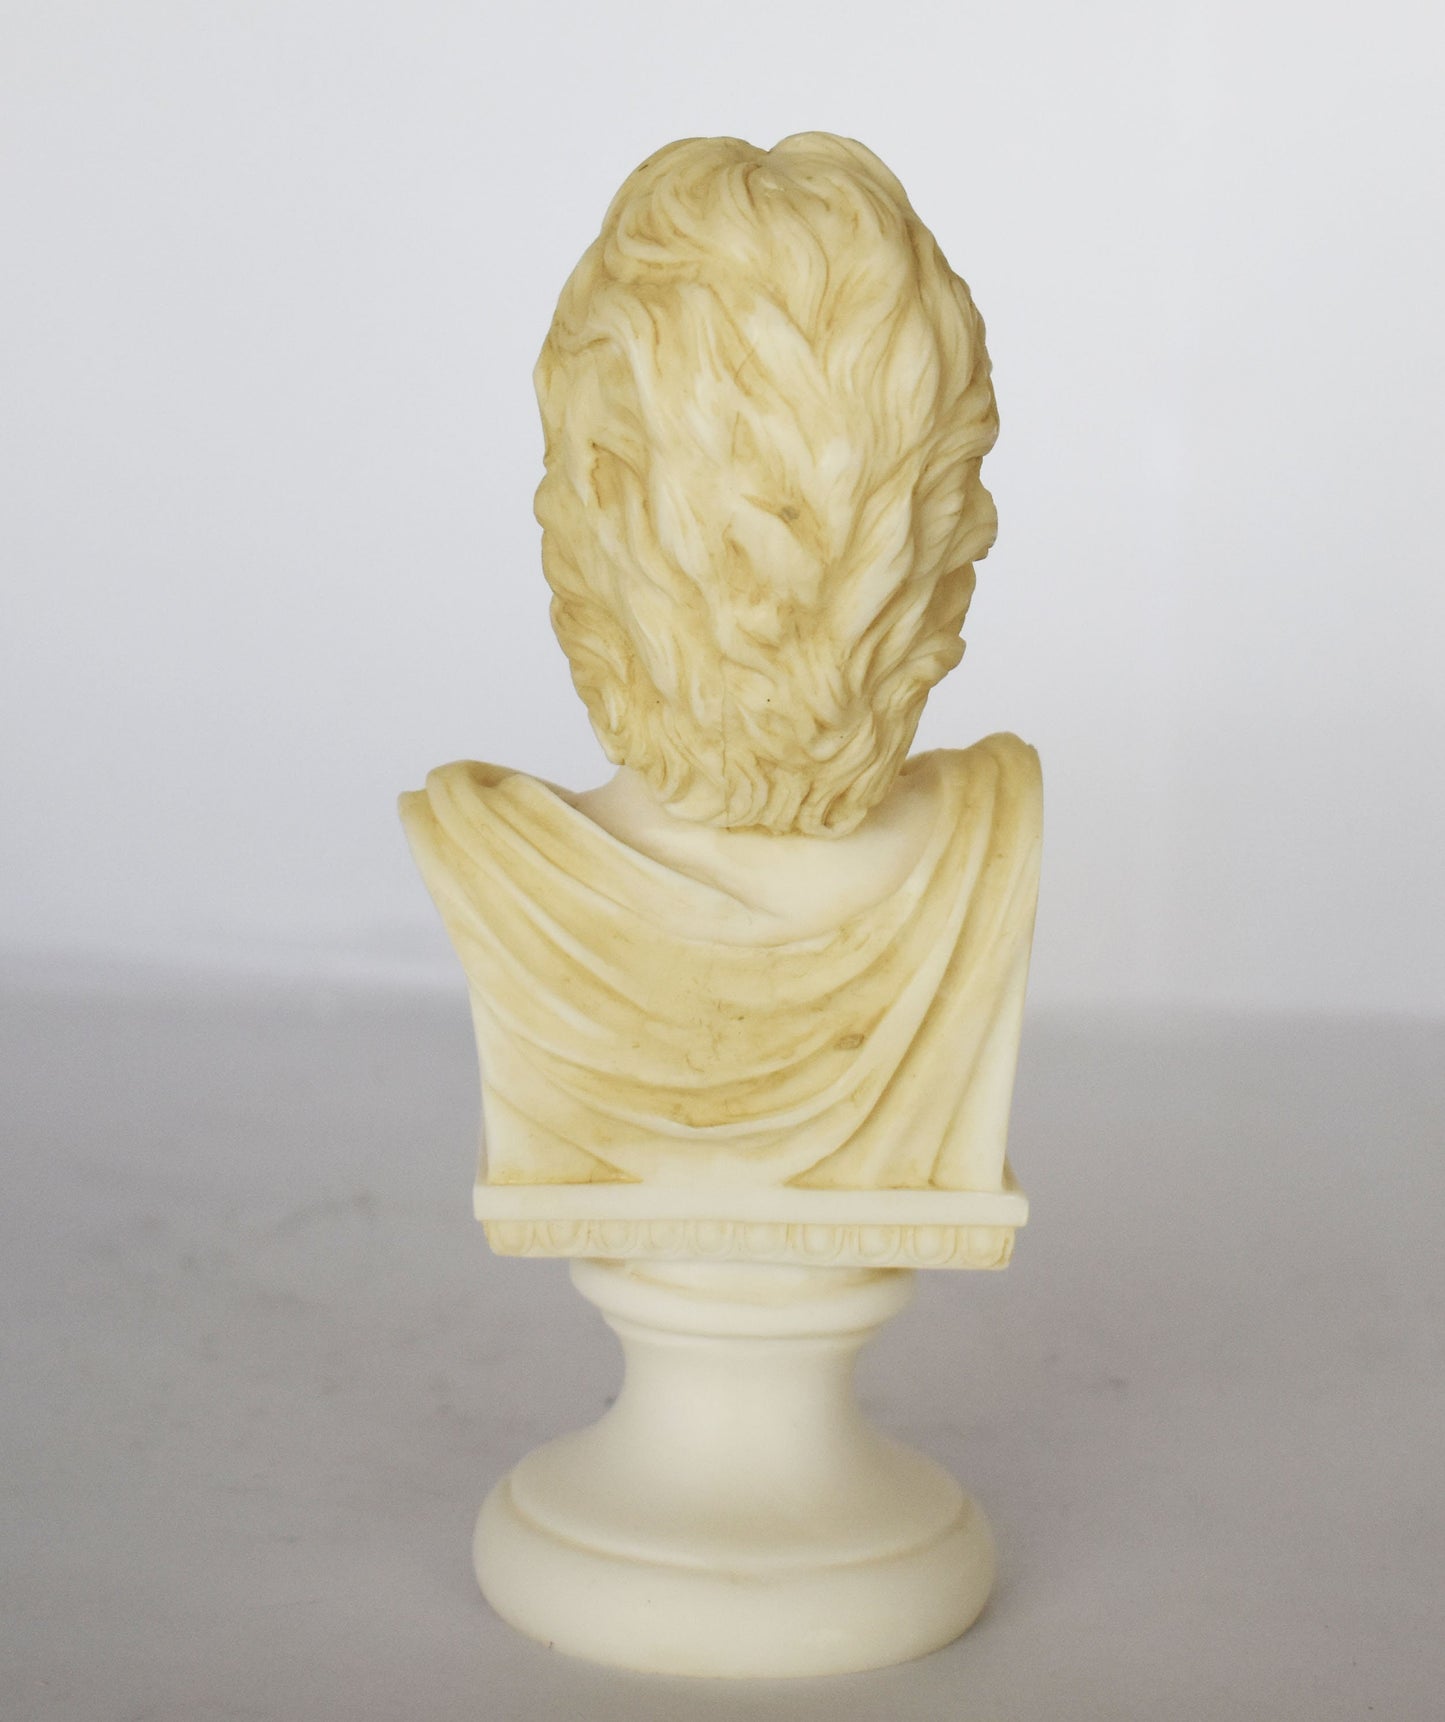 Alexander the Great - Ancient Greece - King of Macedonia - Son of Philip - Alabaster Bust